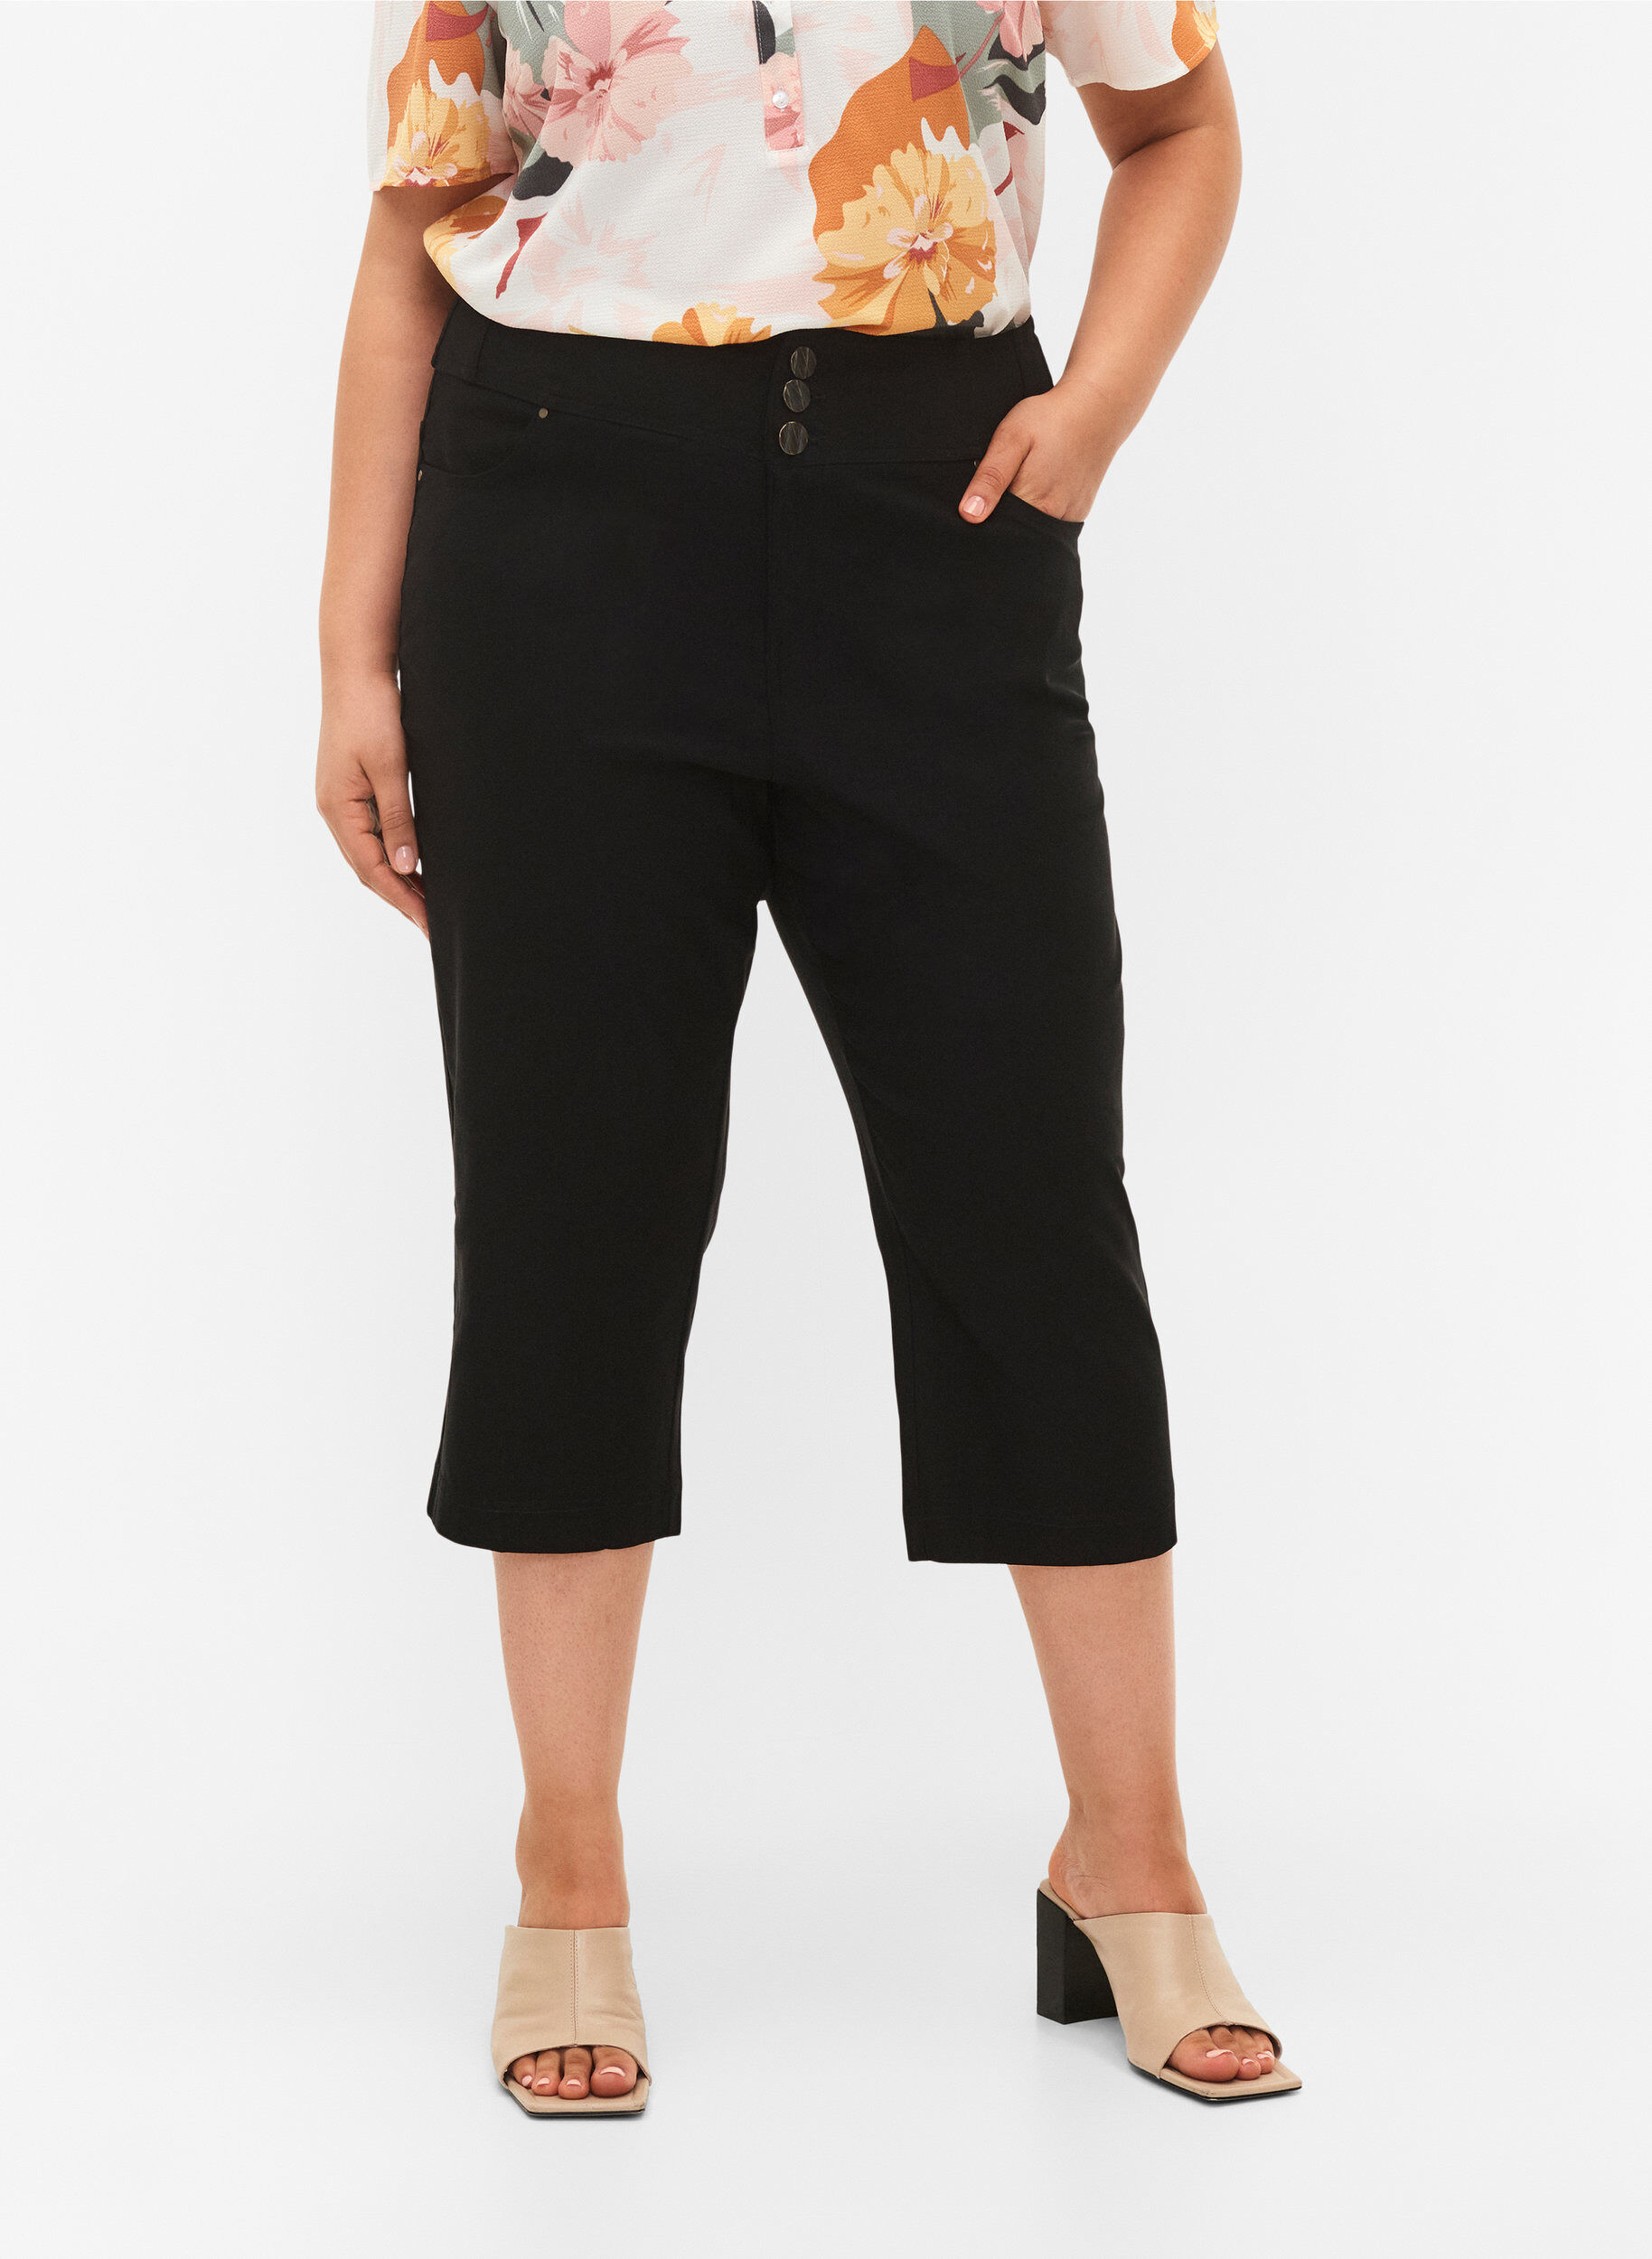 Lieve Van Gorp black capri trousers with open zipped sides and leather ties  - V A N II T A S